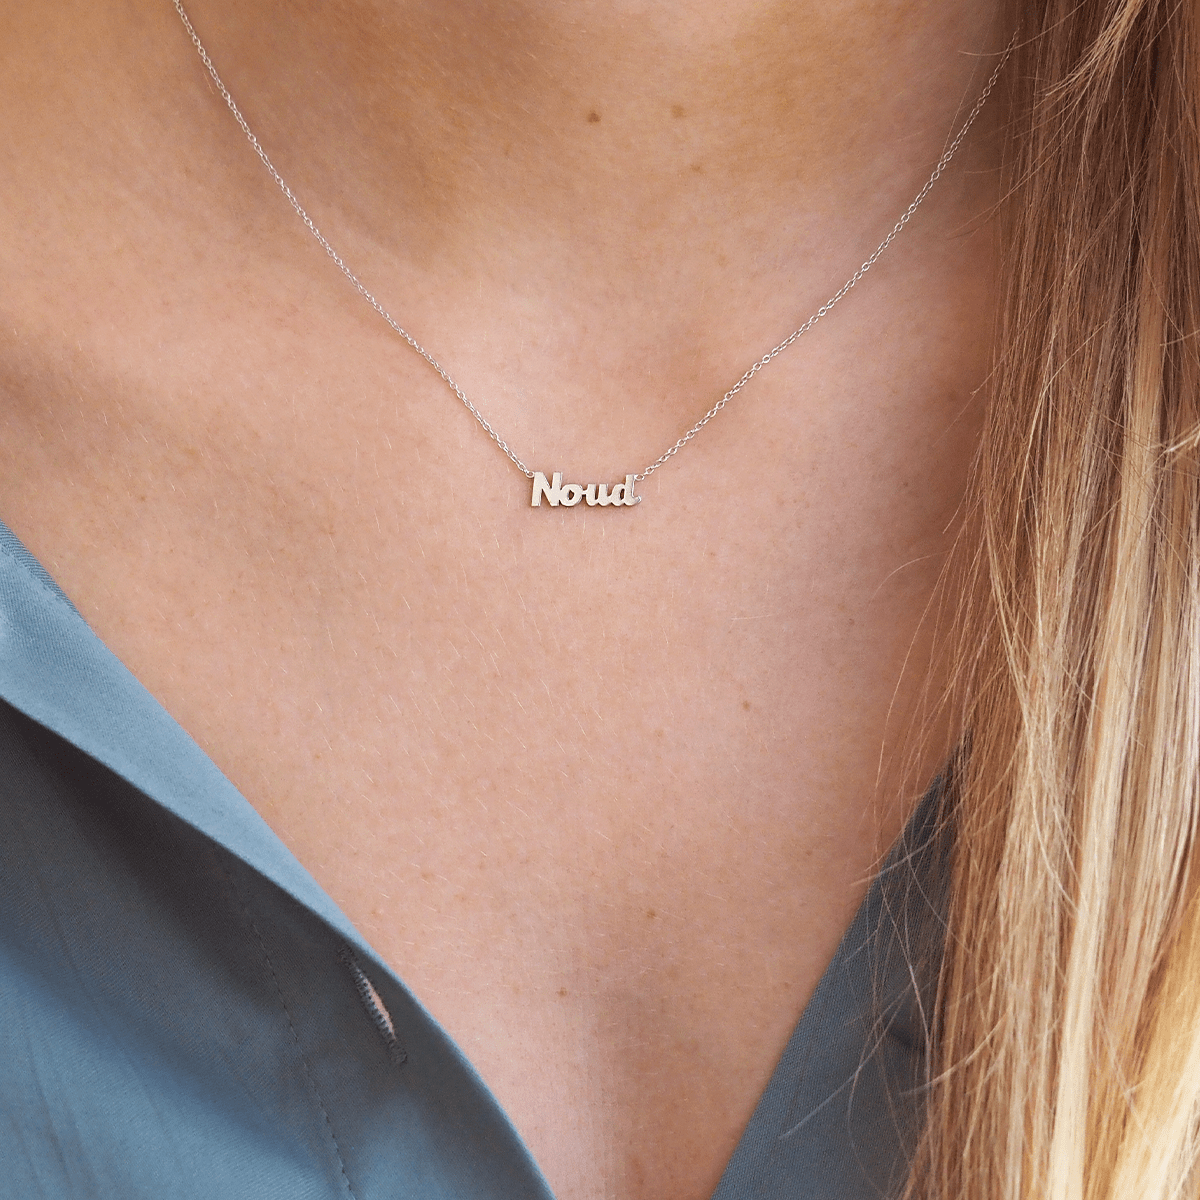 Name Ketting Deluxe